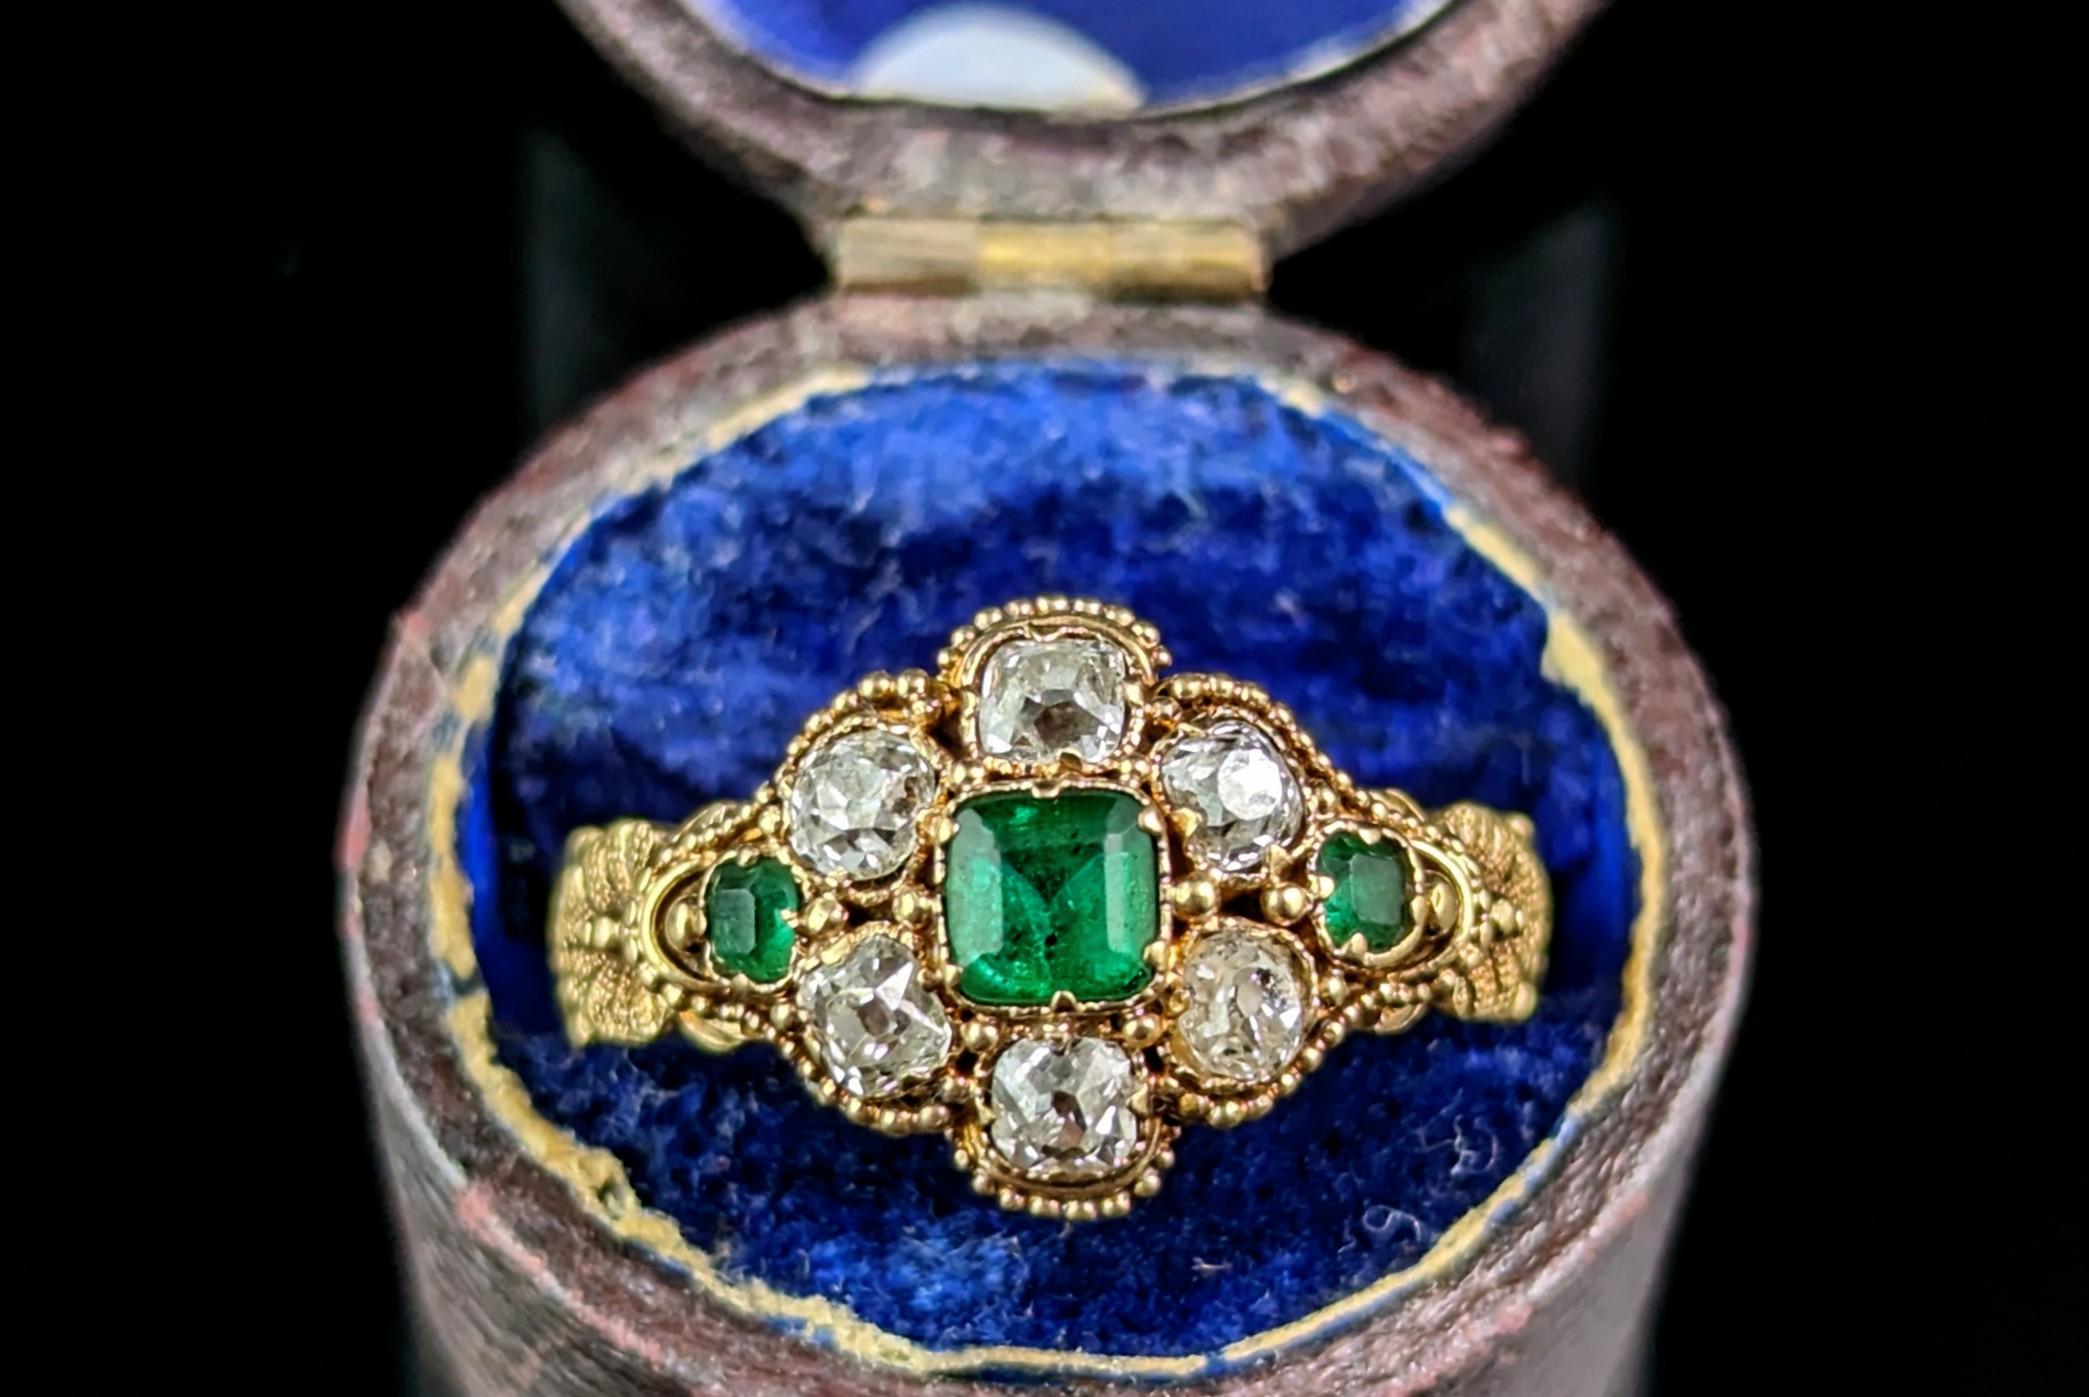 This antique Emerald and Diamond cluster ring is a true showstopper and exudes regal beauty and luxury.

This impeccable ring is crafted in rich buttery 18ct gold with a lightly bevelled band and the most beautiful ornate shoulders, the shoulders